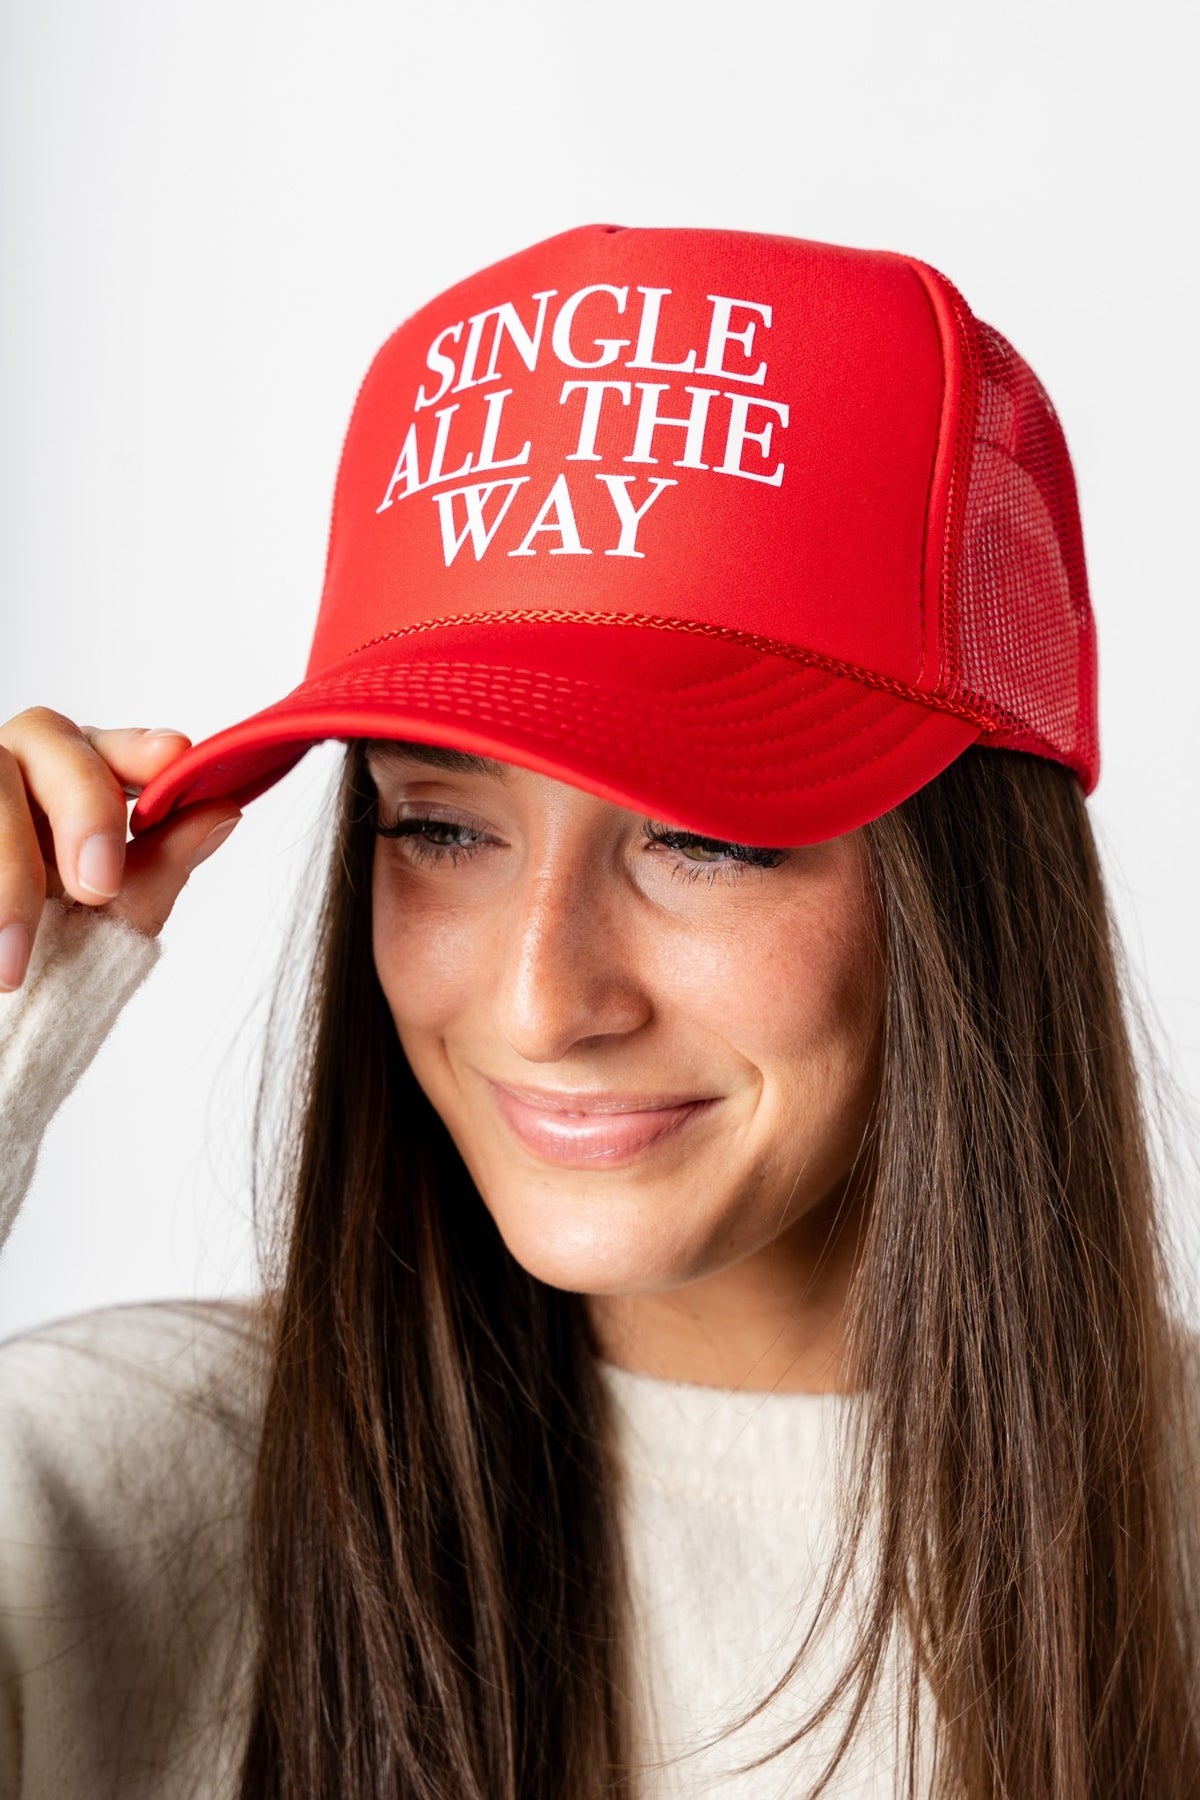 Single all the way trucker hat red - Trendy Hats at Lush Fashion Lounge Boutique in Oklahoma City